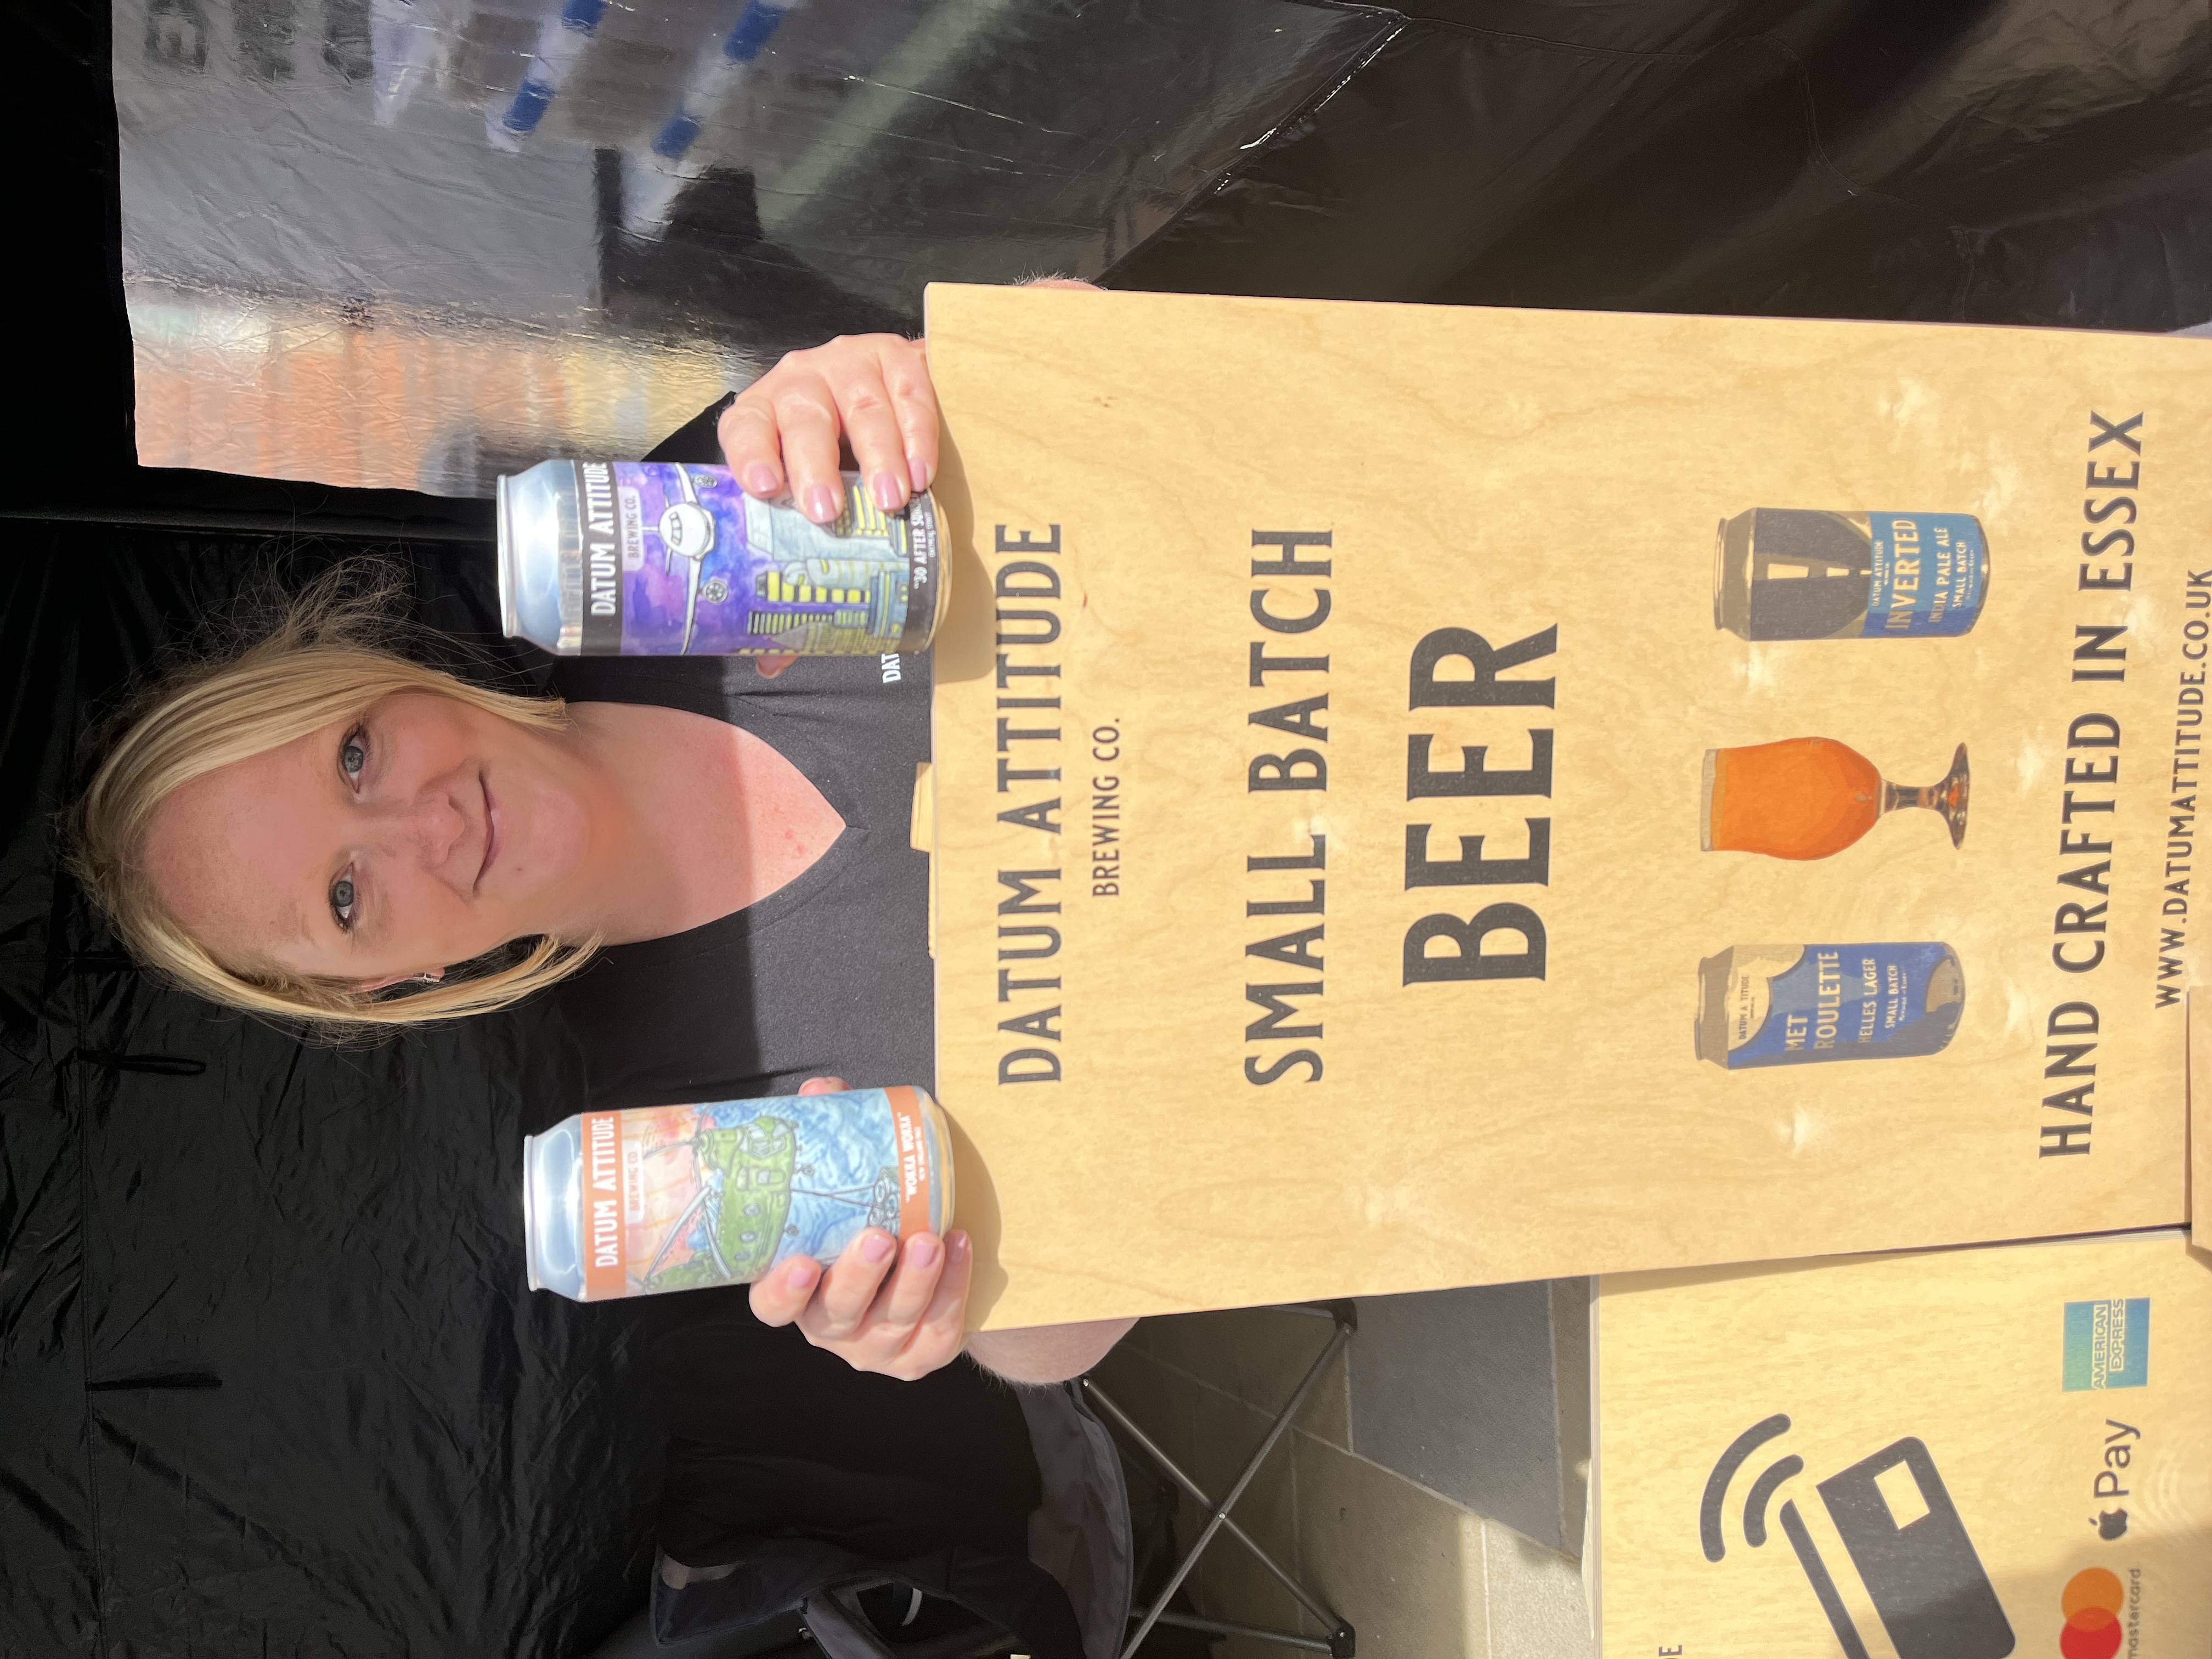 Owner of Datum Atttitude beer stands behind sign with two cans in her hands